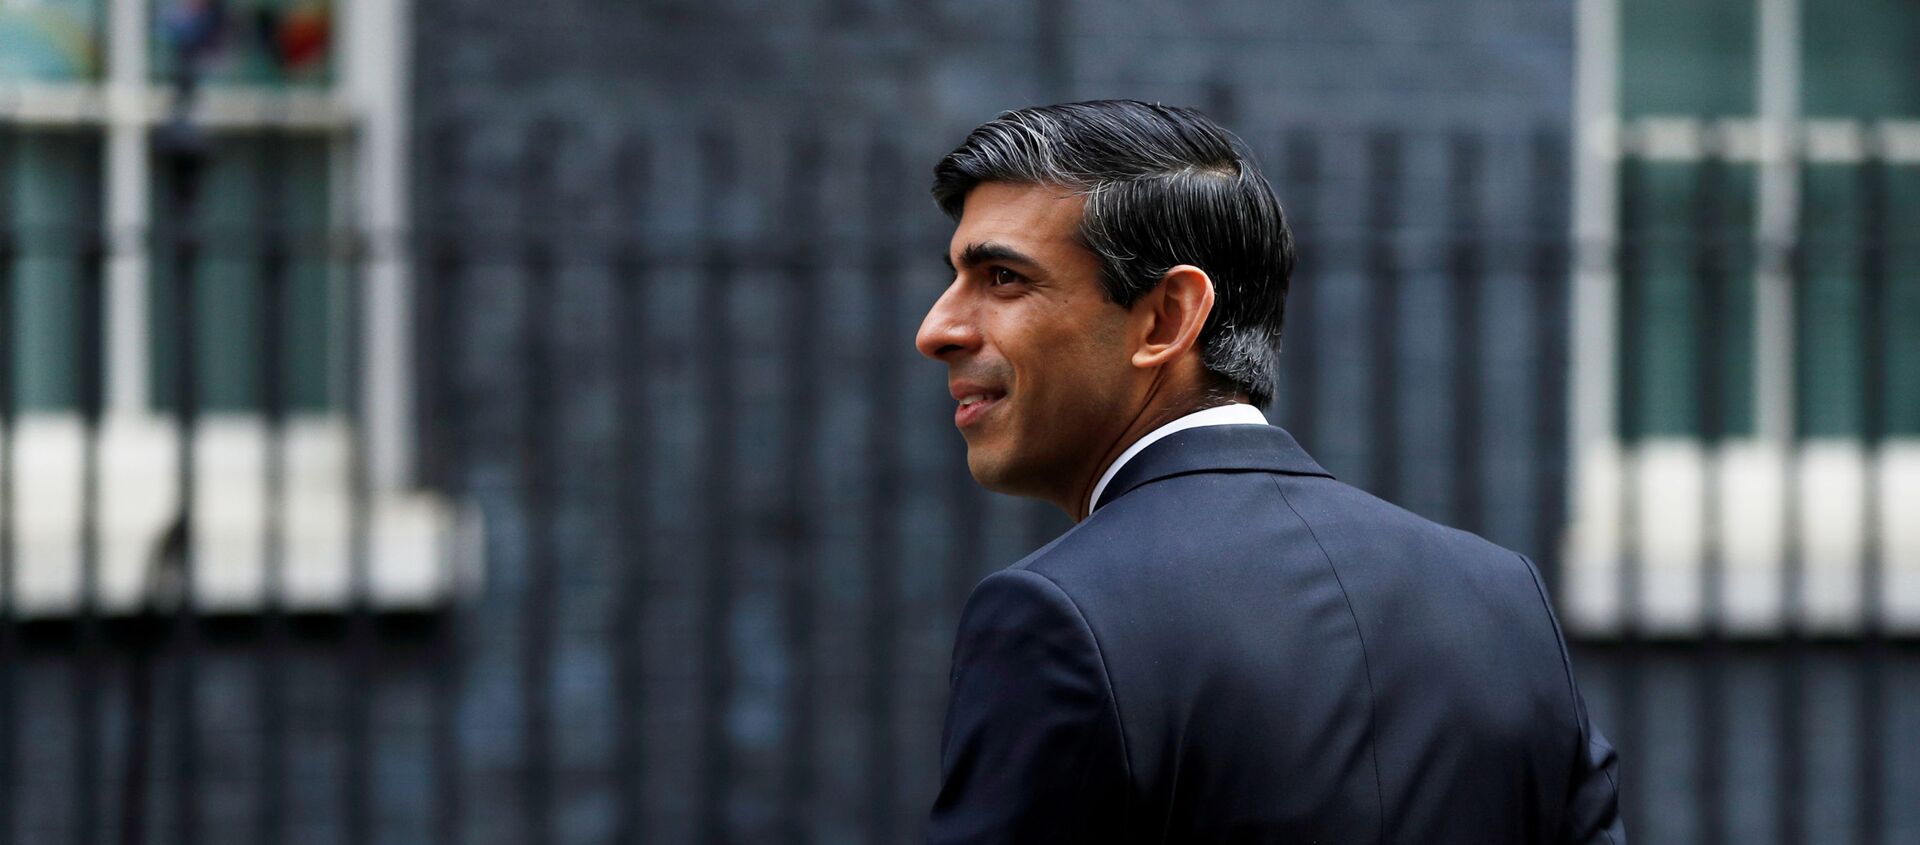 Chancellor of the Exchequer Rishi Sunak is seen as he arrives at Downing Street - Sputnik International, 1920, 02.09.2020